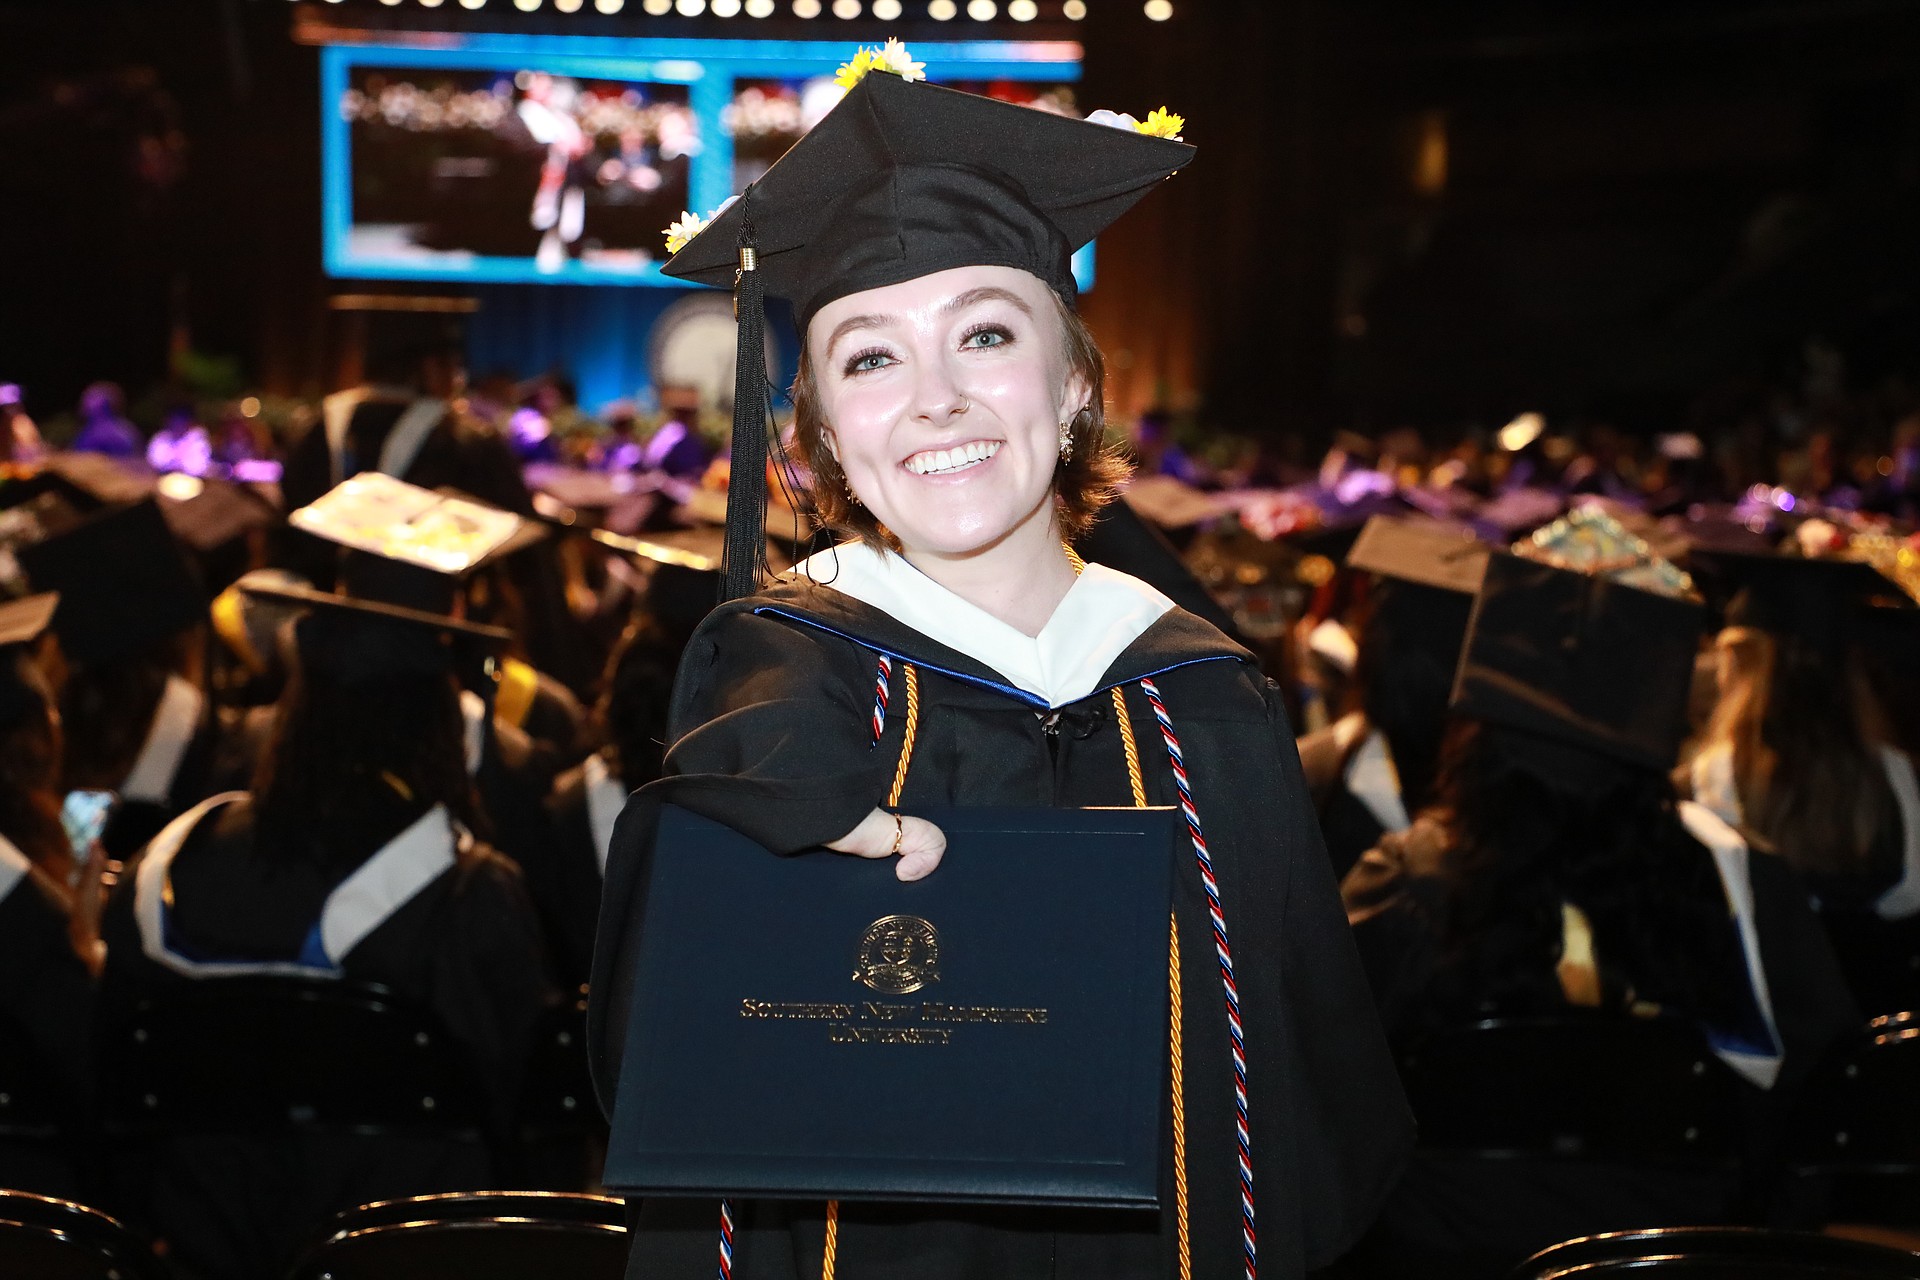 Emily Rowley graduated from Southern New Hampshire University and now will pursue her master's degree in forensic psychology.